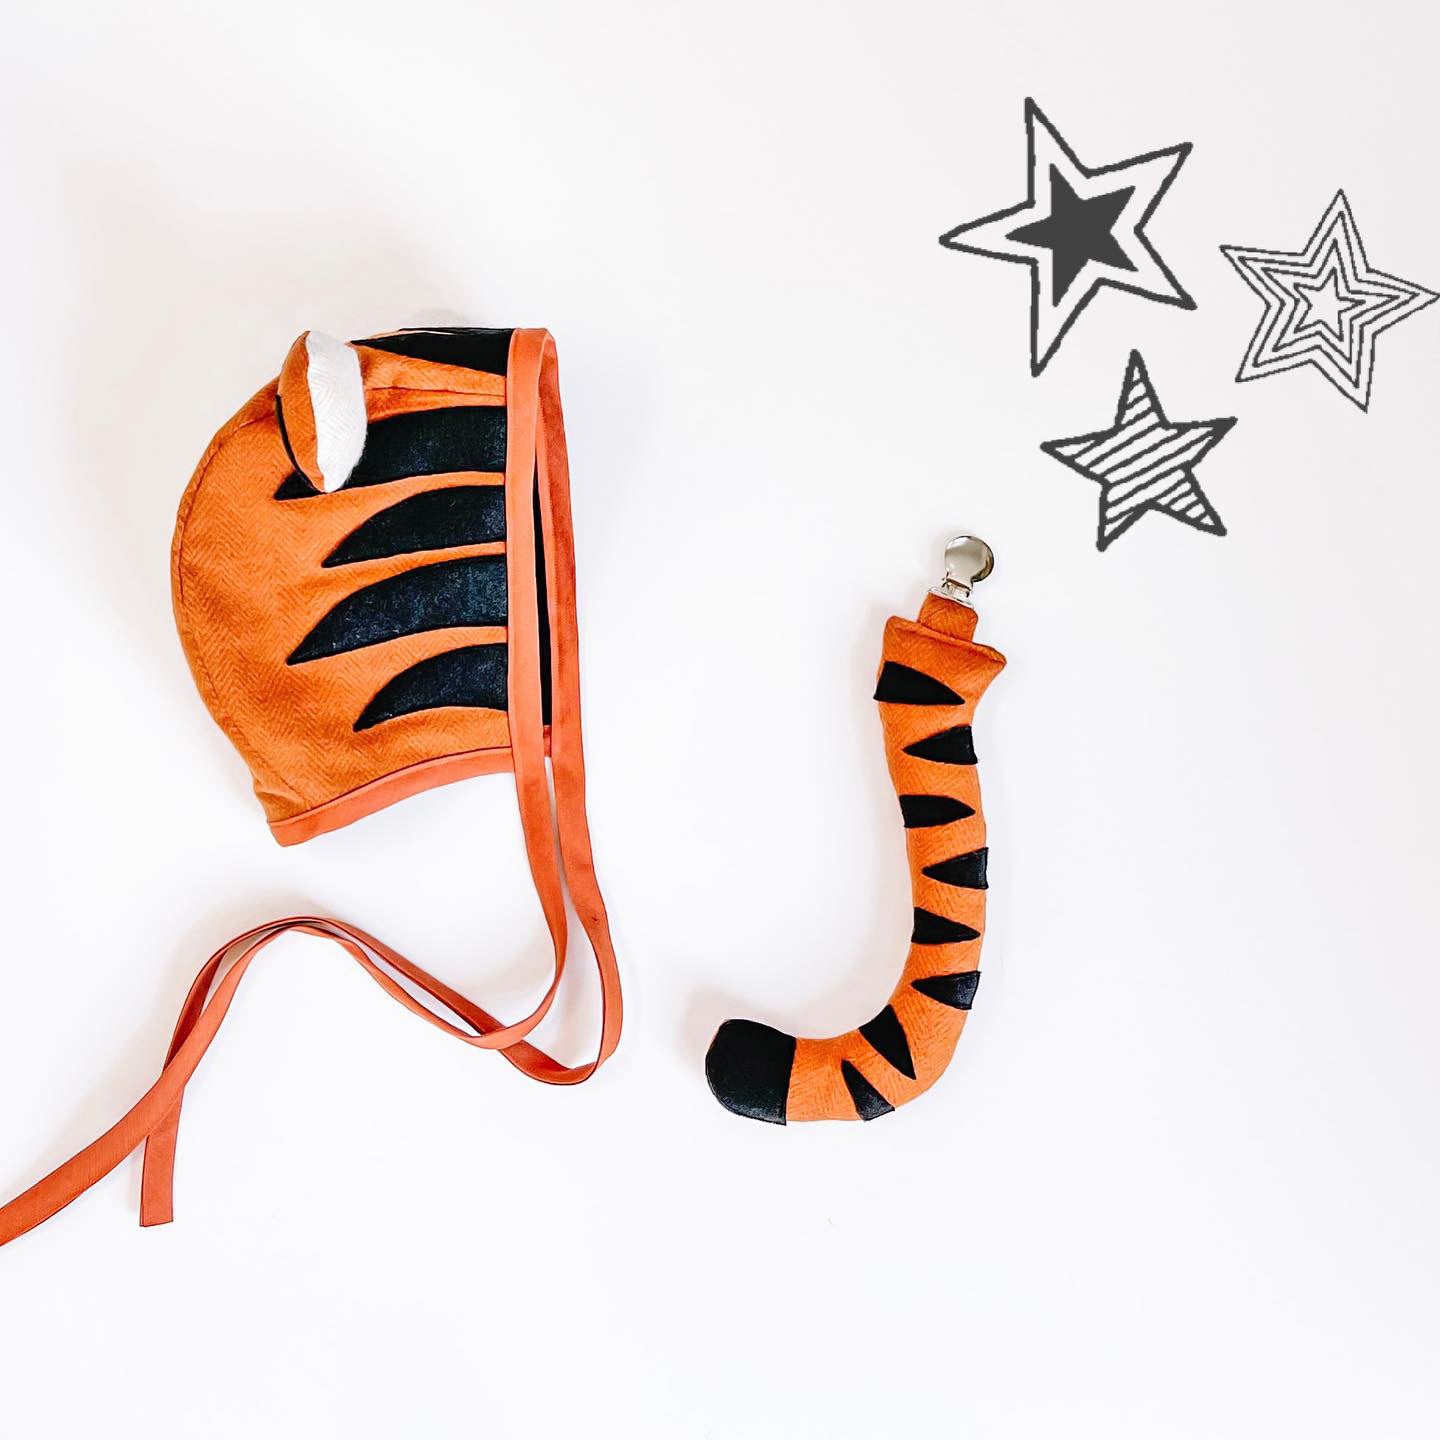 Tiger Costume - Tiger Bonnet and Tail